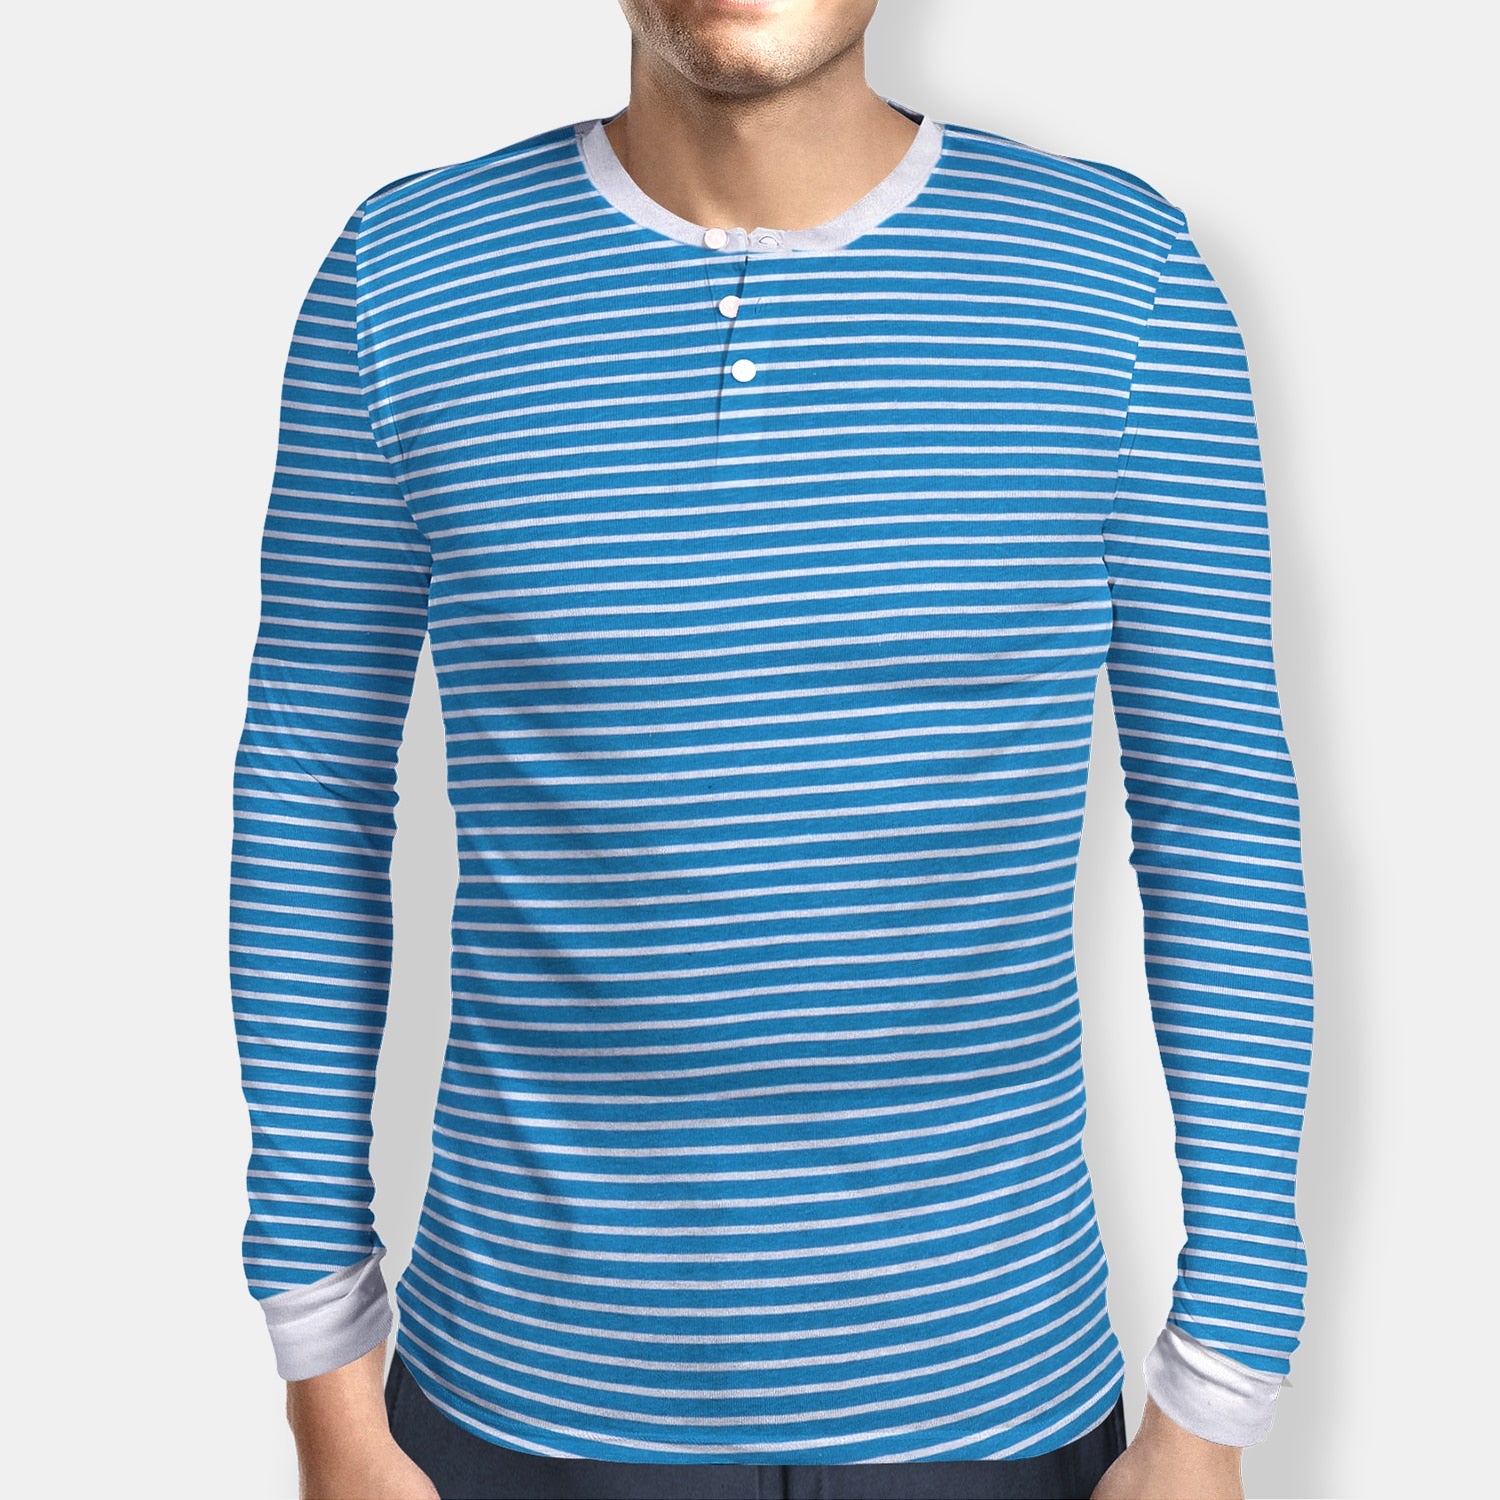 Henley White & Blue Liner Full Sleeves Shirts - Code 10A